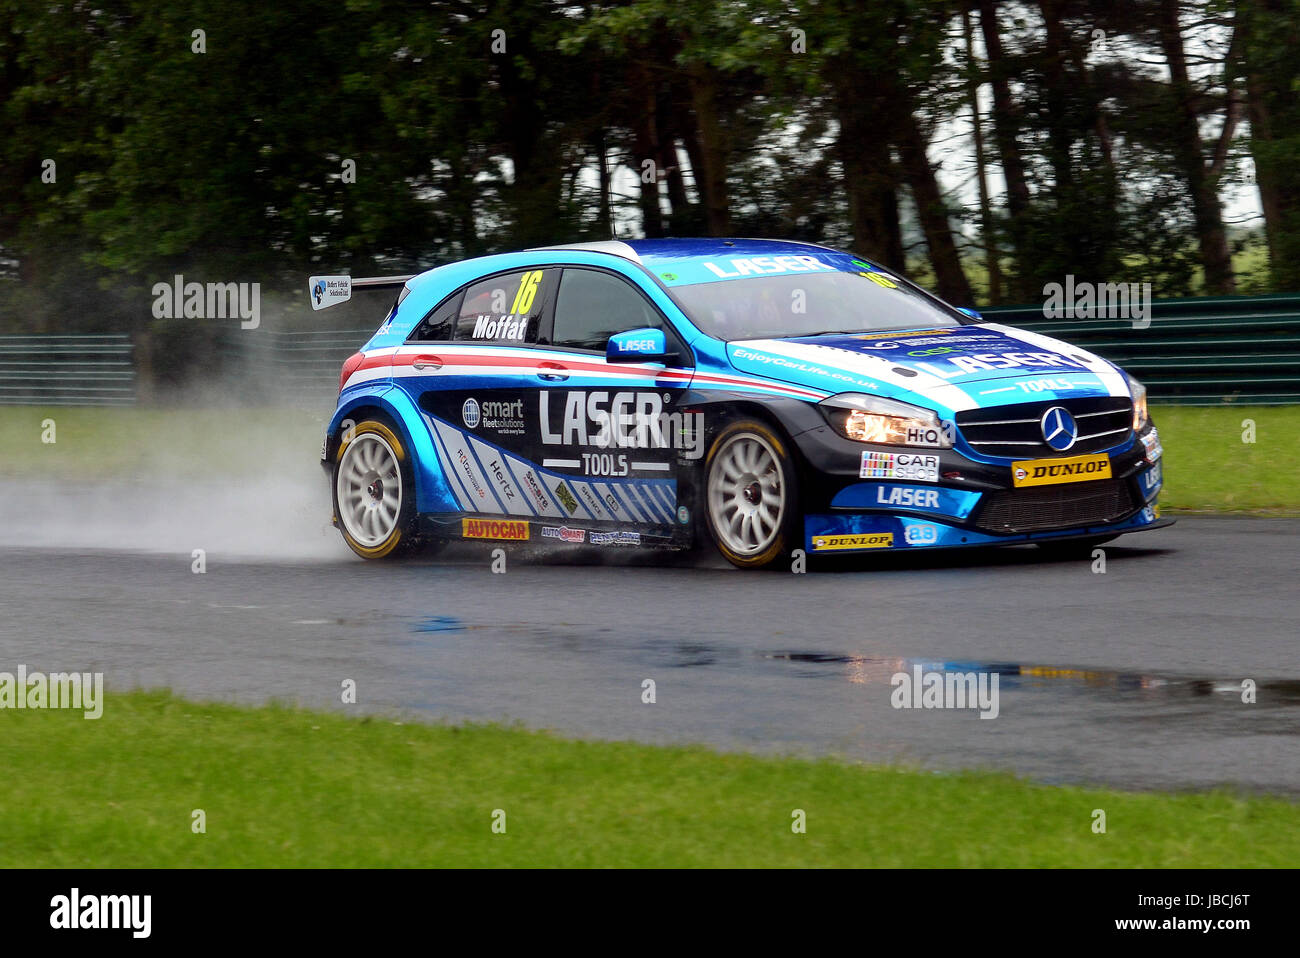 Dalton On Tees, UK. 10, June, 2017. Aiden Moffat driving car number 16, the Mercedes-Benz A-Class for Laser tools racing at the Dunlopr MSA British Touring Car Championship at Croft Circuit. Driving in heavy rain on the Dunlop MSA British Touring Car Championship Free Practice. © Rob Chambers/ Alamy Live News Stock Photo